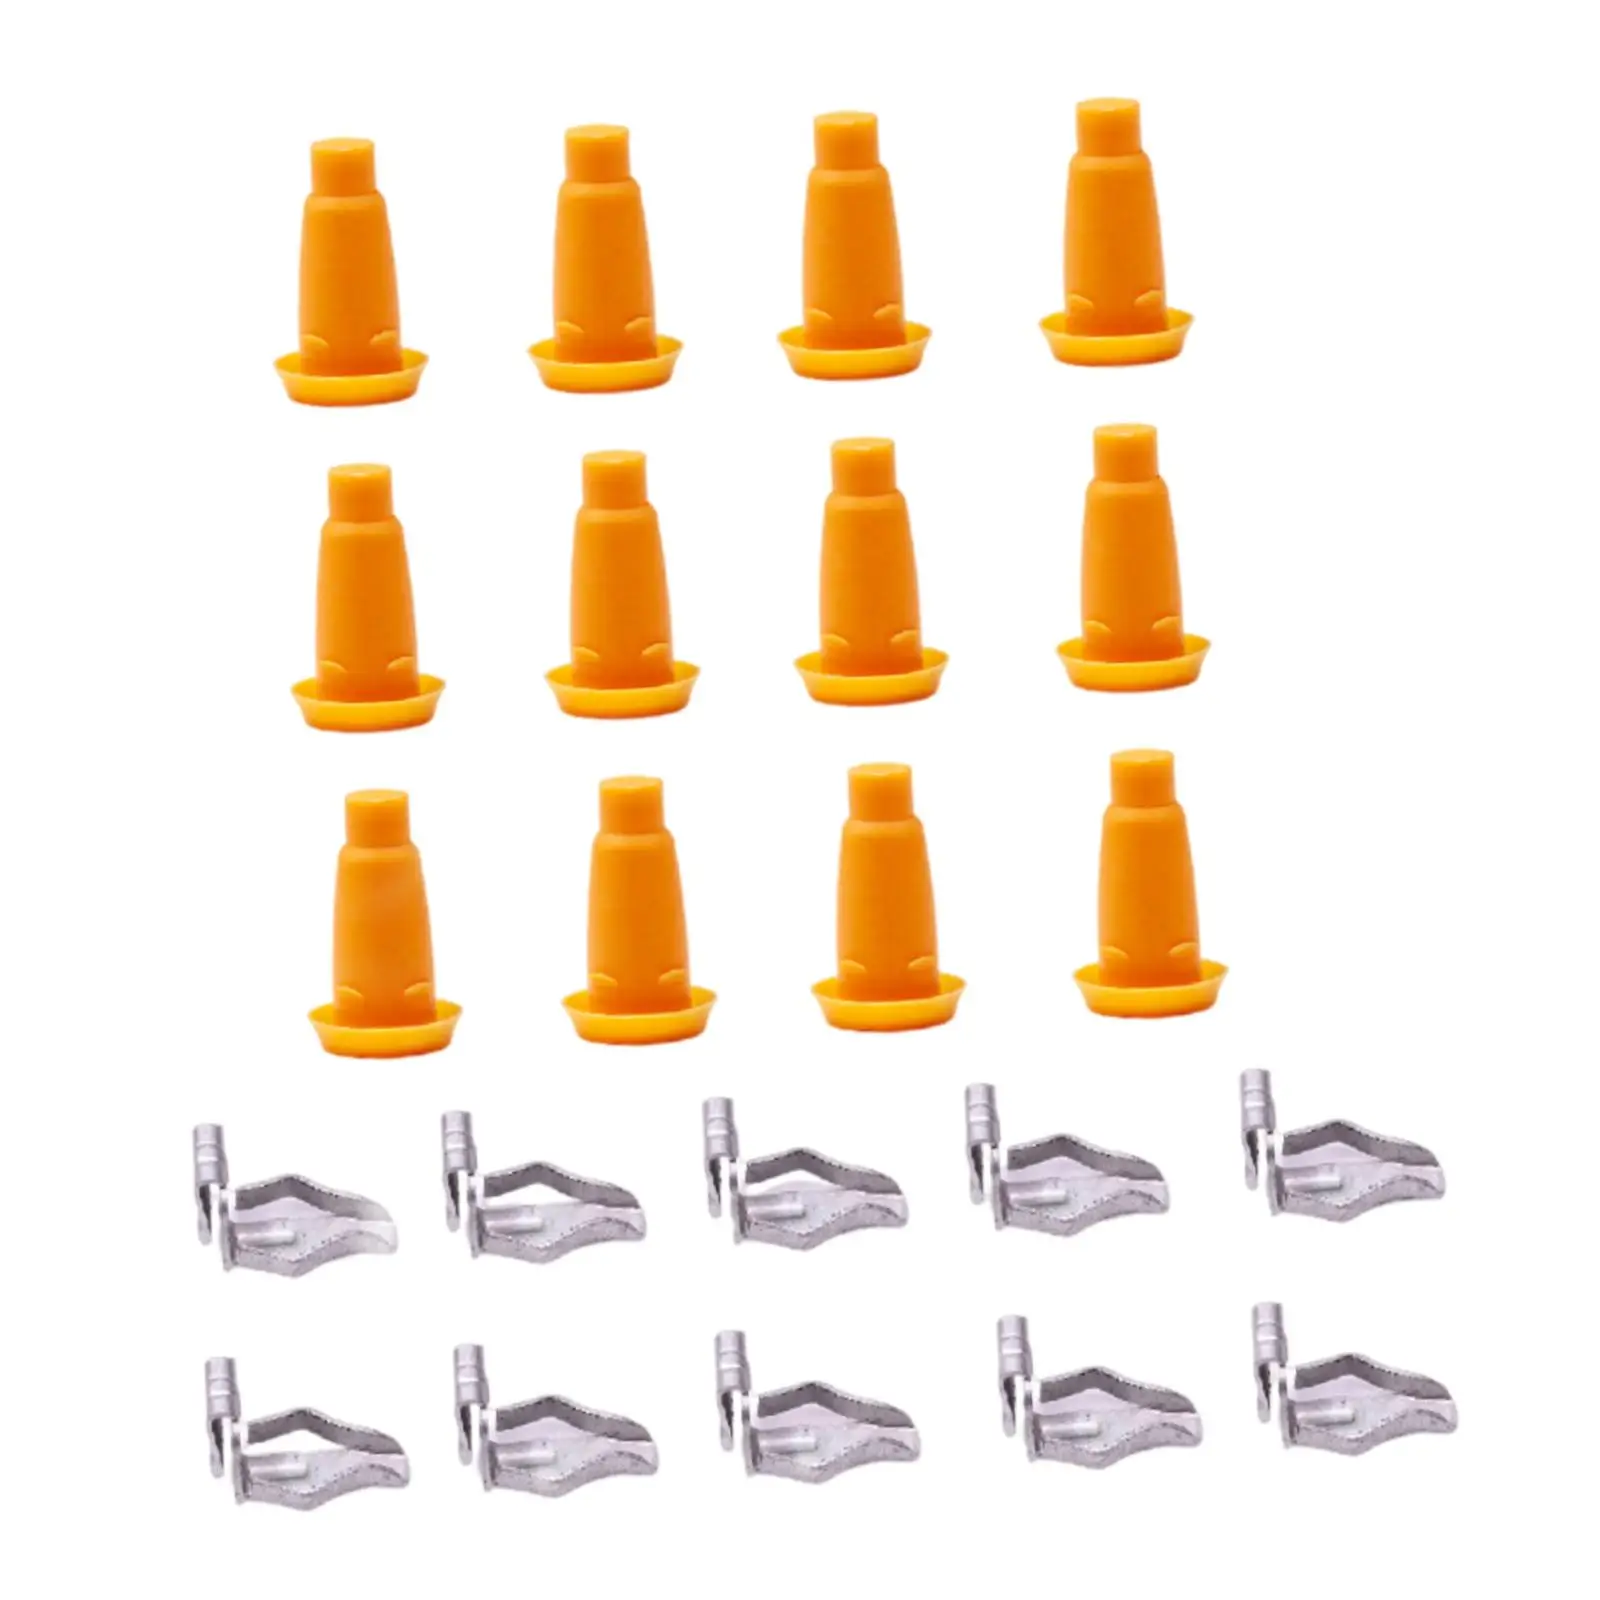 24Pcs Front Door Panel Clip Frame Plugs Clips Kit 4500027 for Chevy Camaro Chevelle Corvair Accessories Stable Performance